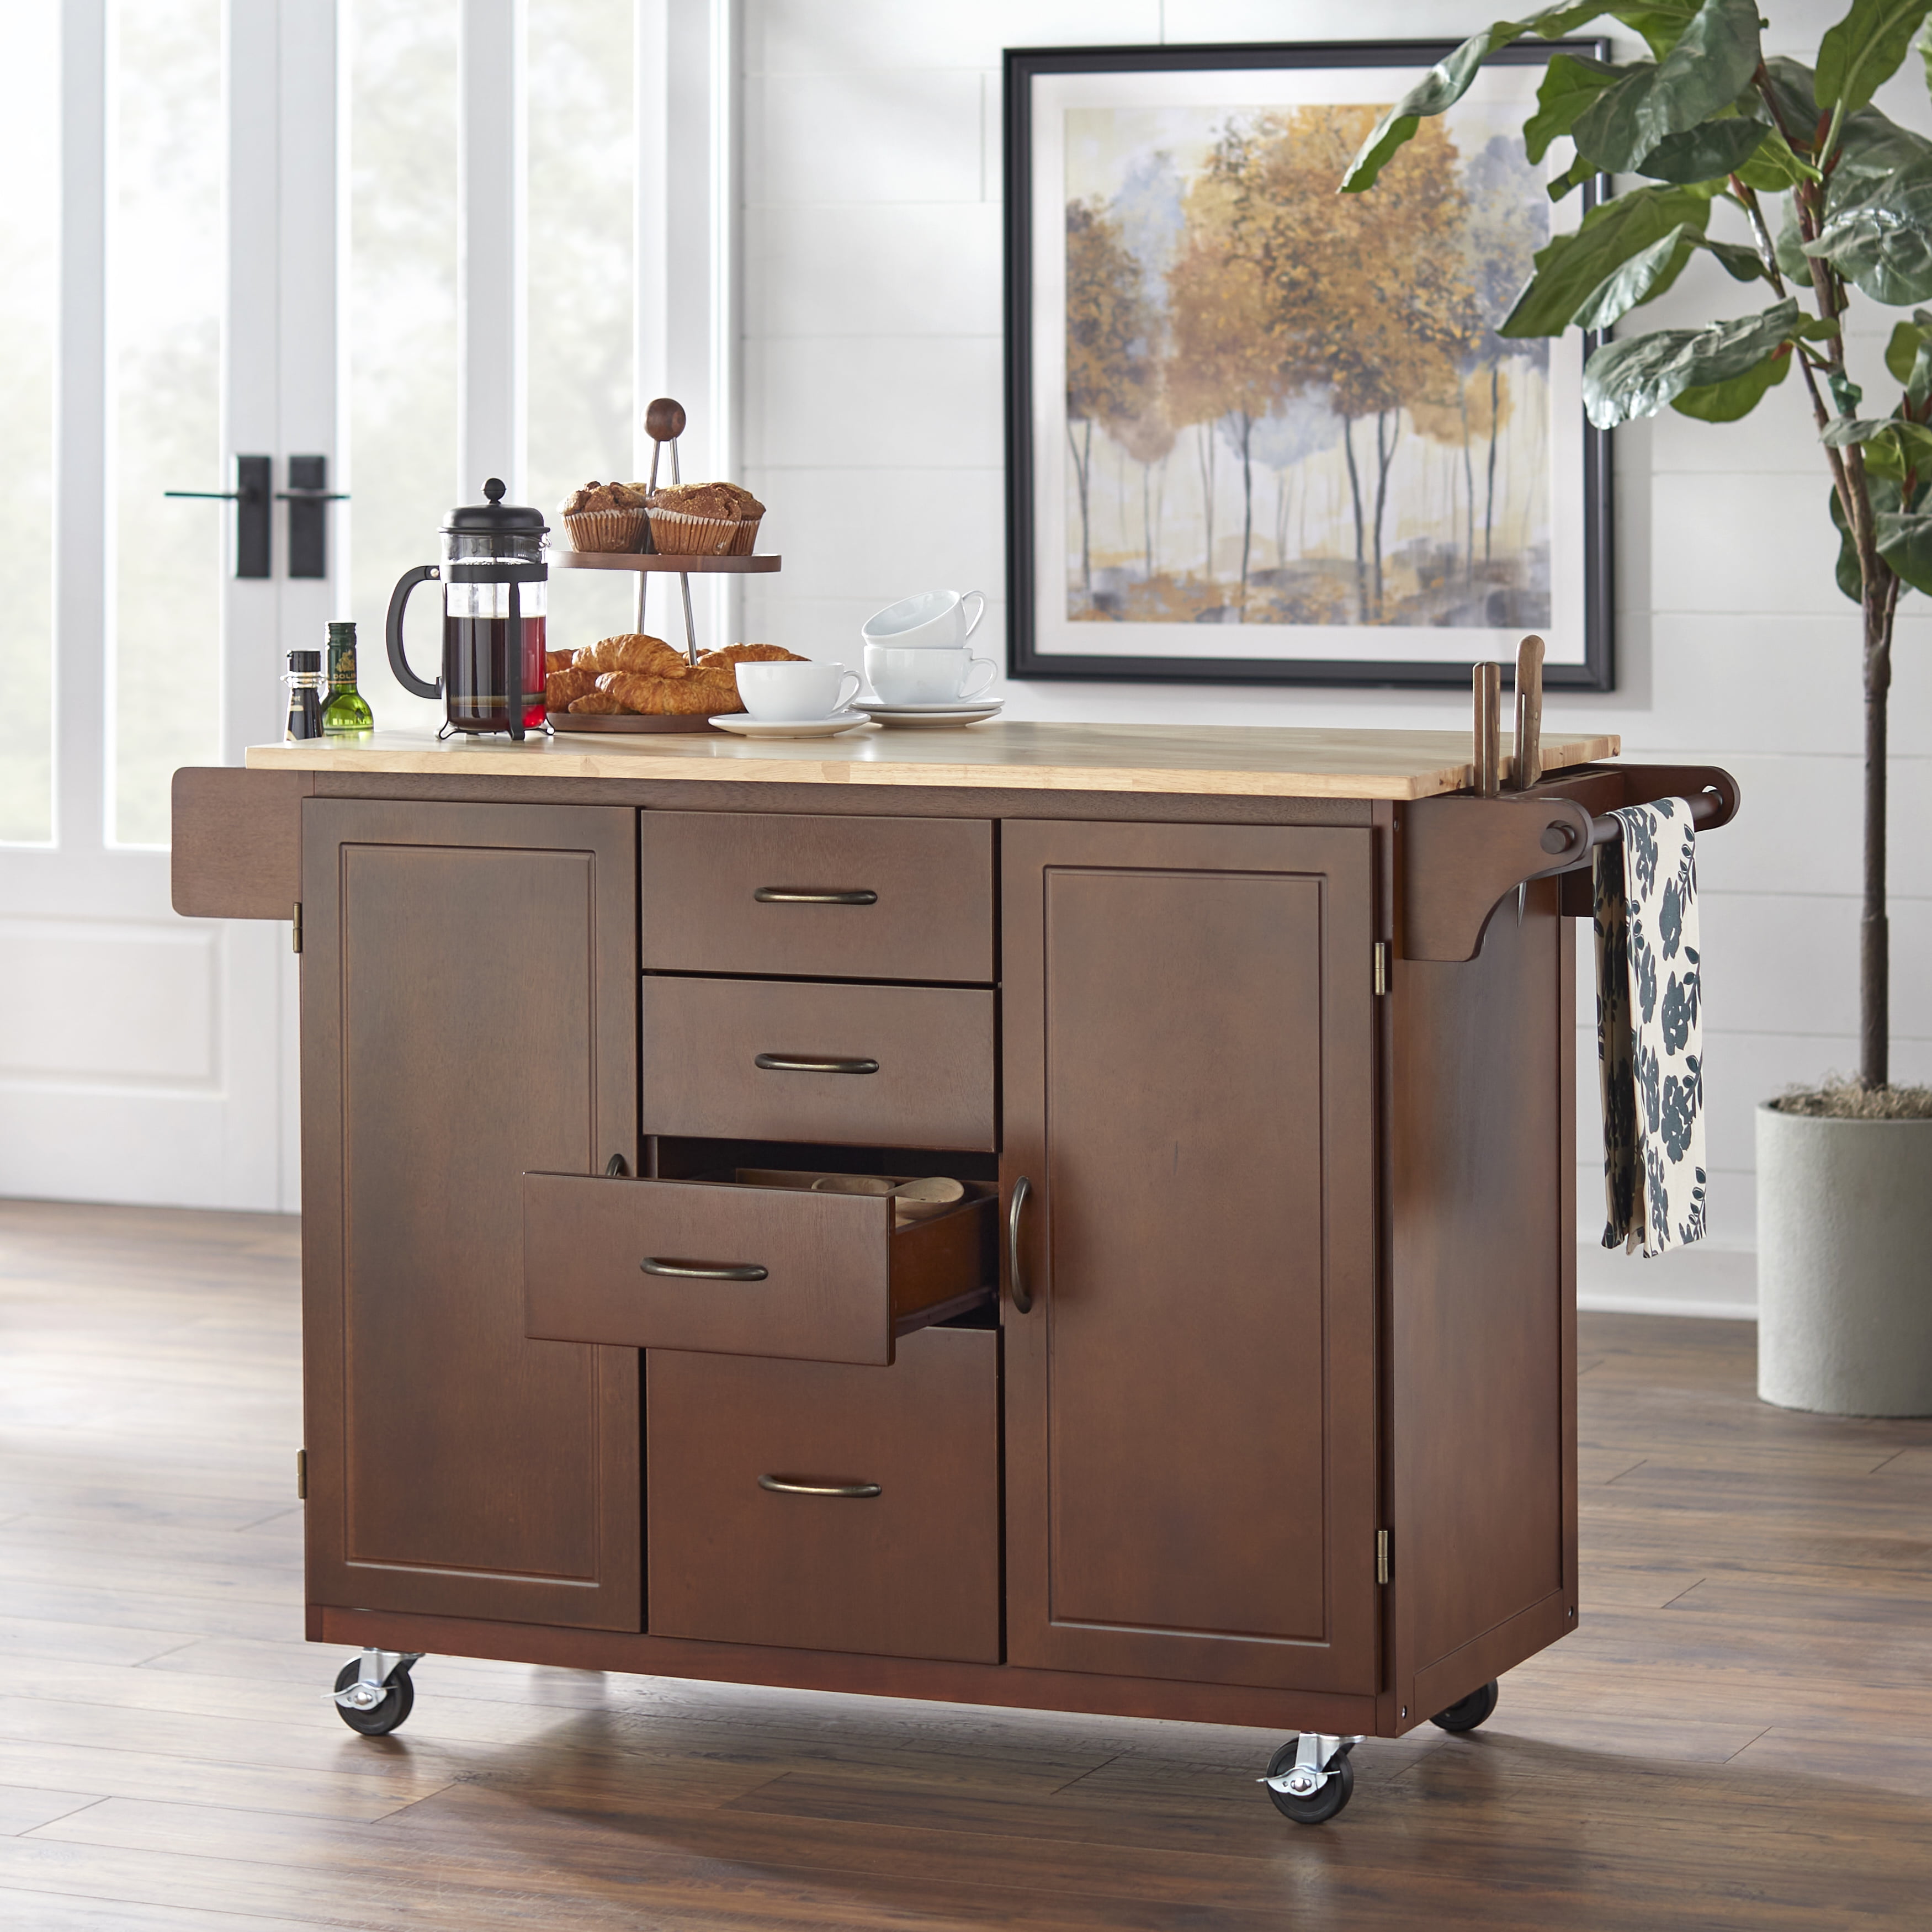 TMS Large Kitchen Cart with Wood Top Black